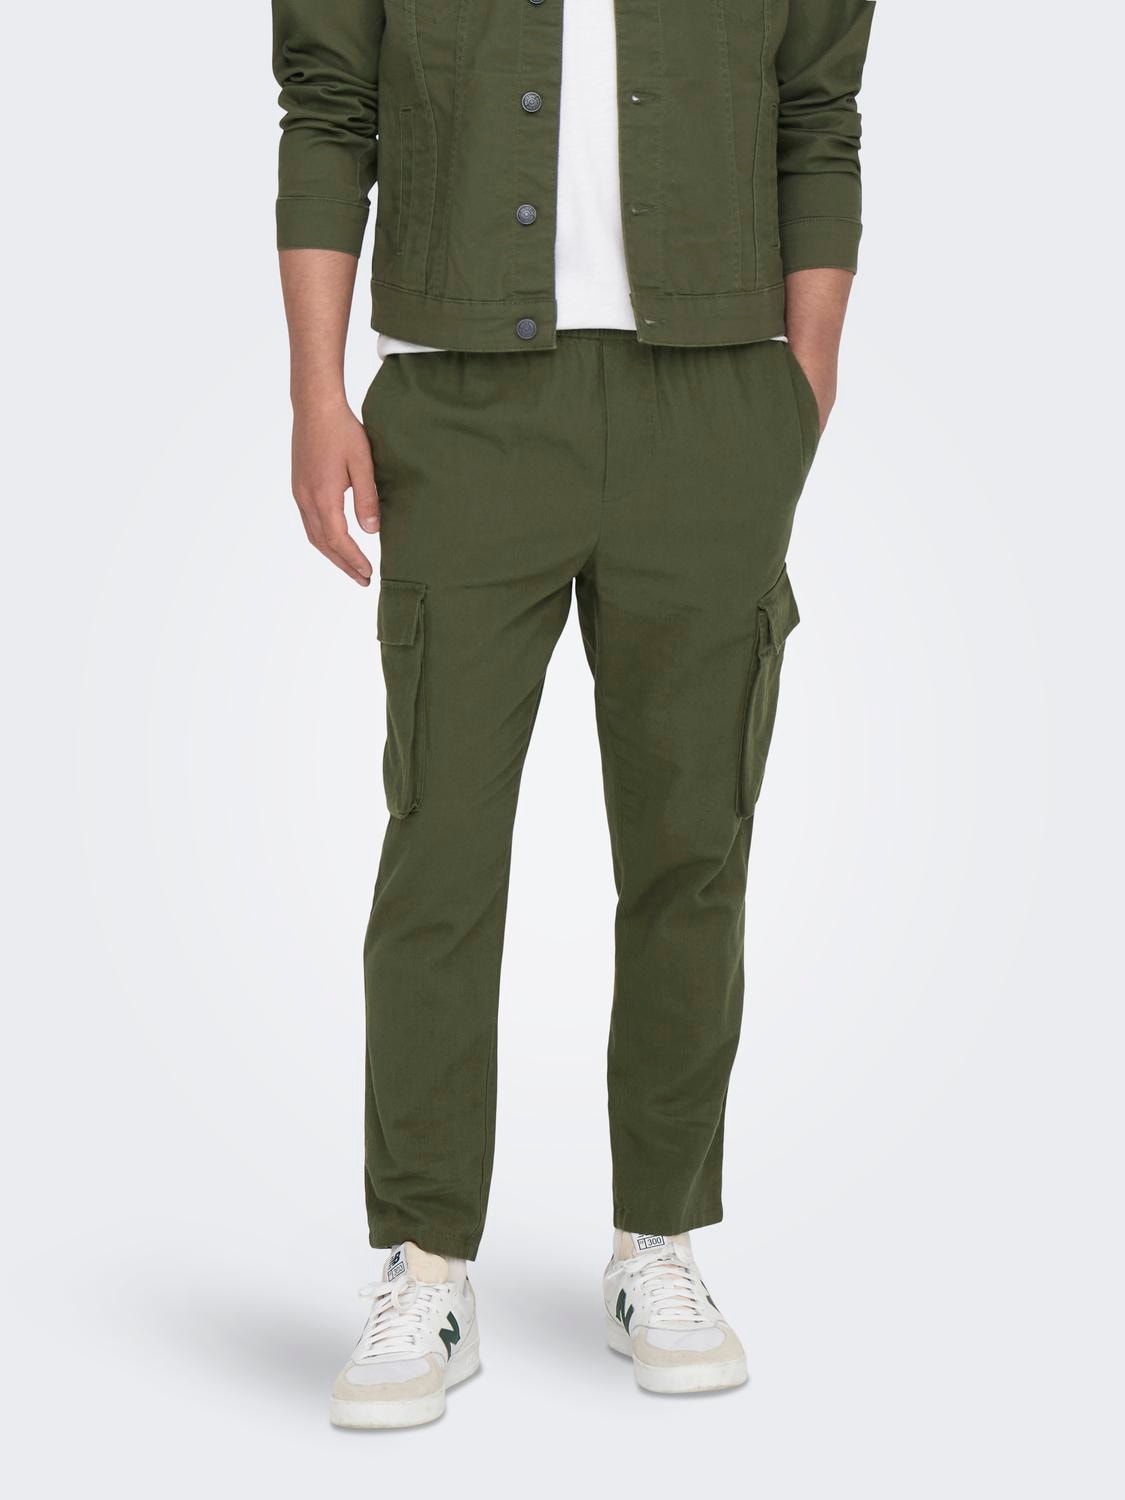 ONLY & SONS ONSLINUS CROP 0019 COT LIN CARGO PNT -Olive Night - 22024998